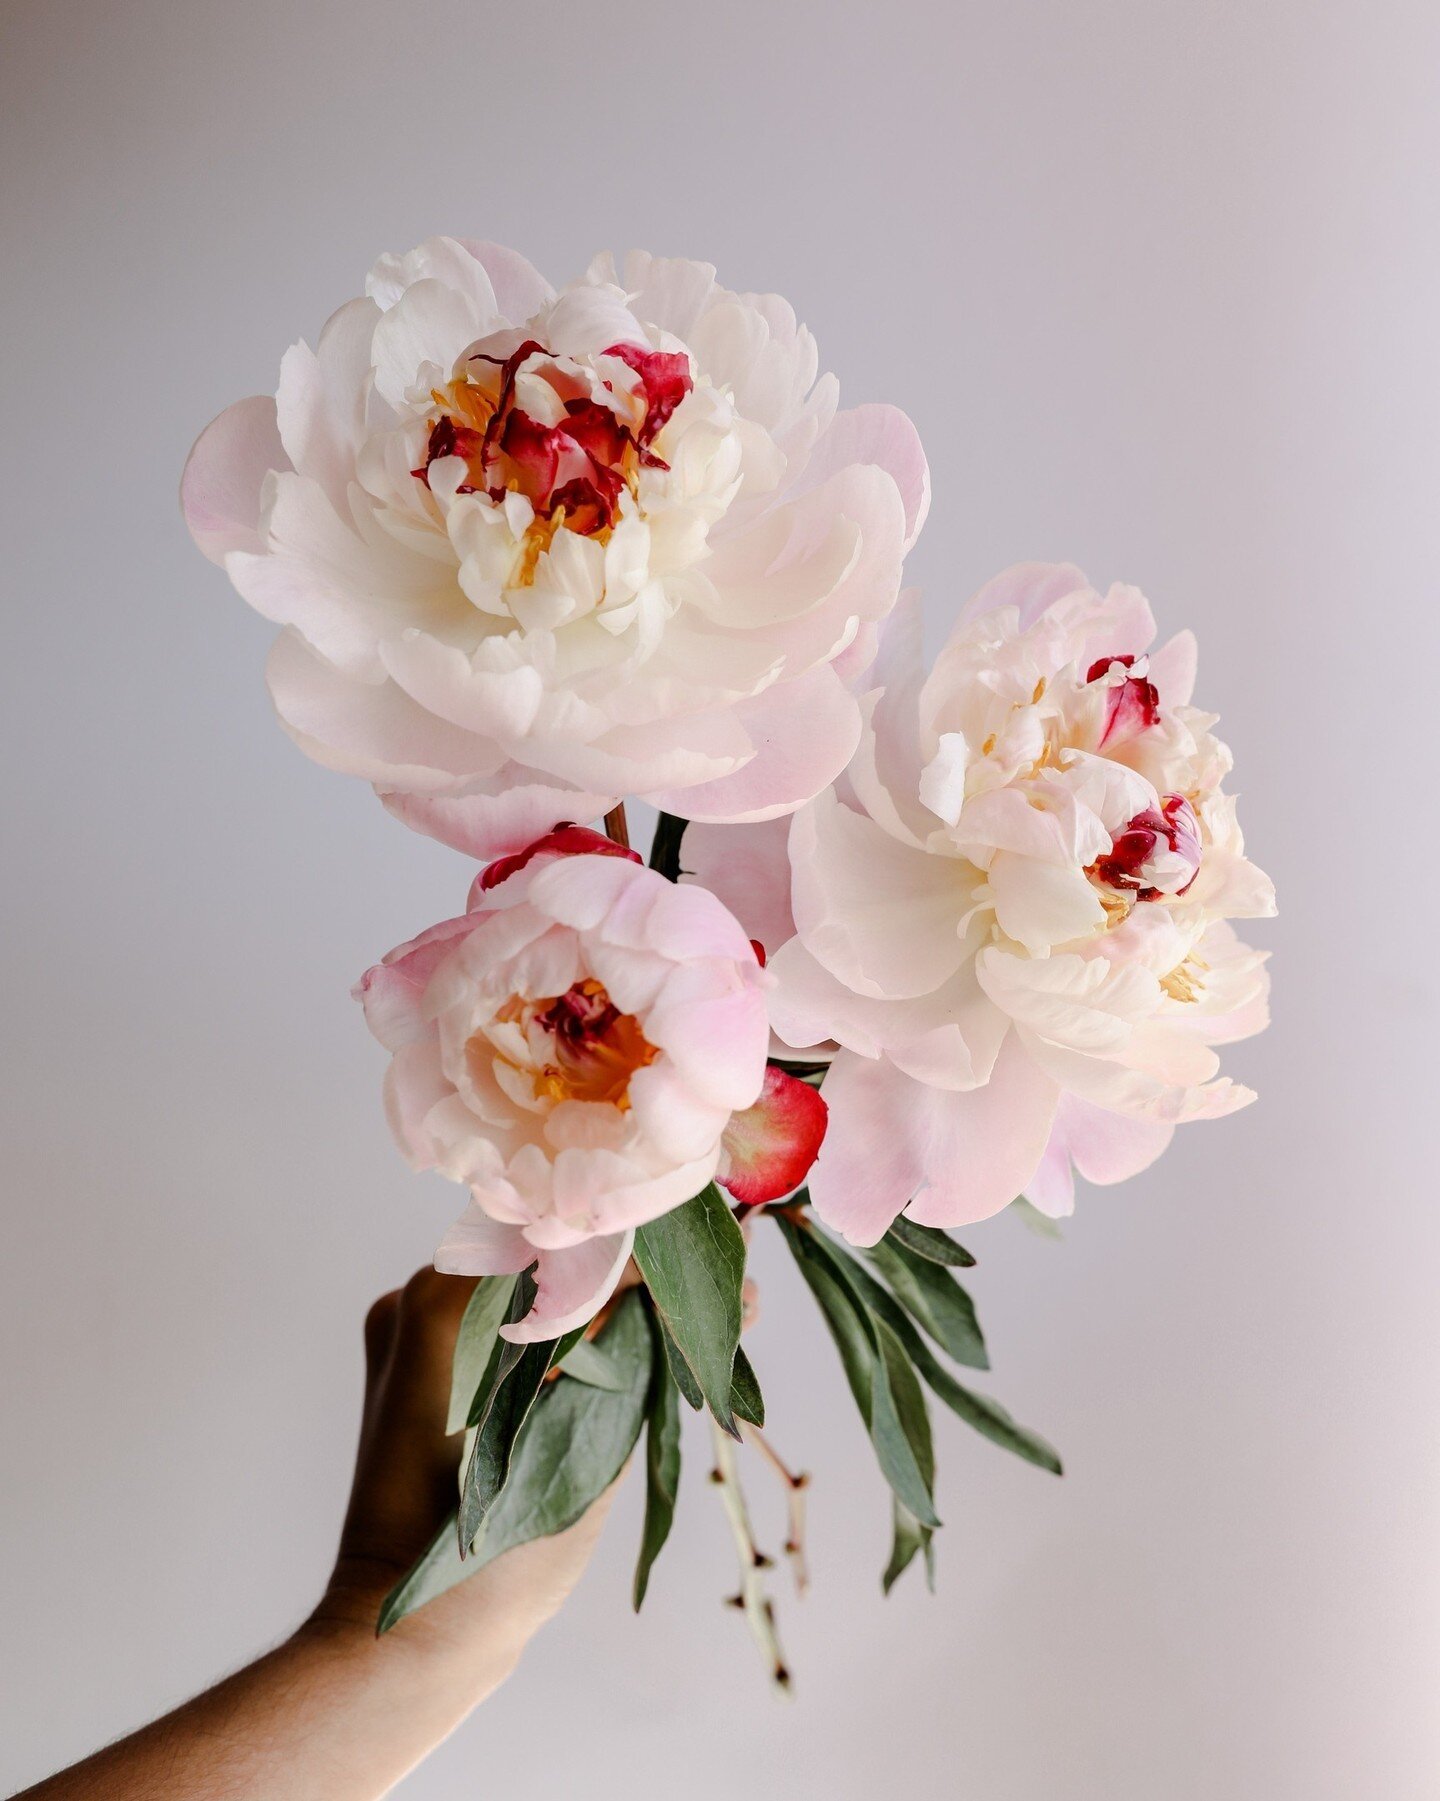 Since it's the first day of Spring, we want to show you one of our favorite Spring flowers. Peonies are a showstopper in wedding flowers, especially in the Spring!⁠
⁠
Interested in getting them for your wedding? Book a custom consultation with us and